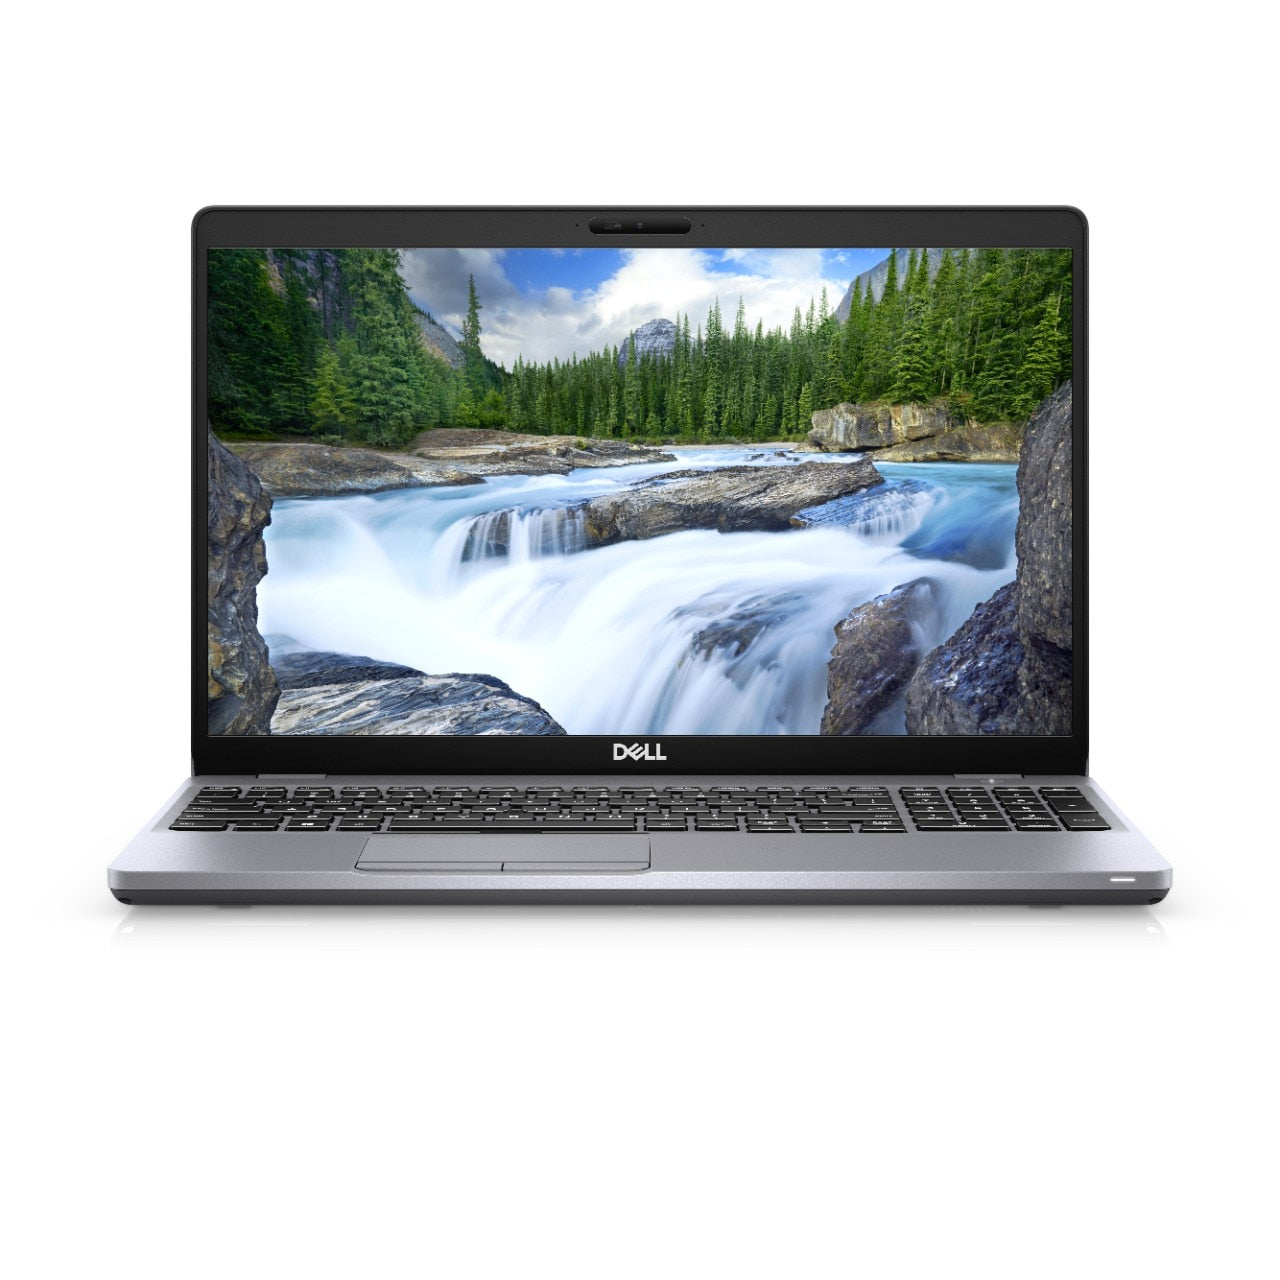 BSB-XRC51GGRE95YIXWY-NEW-NEW-LAP-DL 2020 Dell Latitude 5510 Laptop 15.6" - i7 - i7-10610U - Quad Core 4.9Ghz - 512GB SSD - 16GB RAM - 1366x768 HD - Windows 10 Pro Black